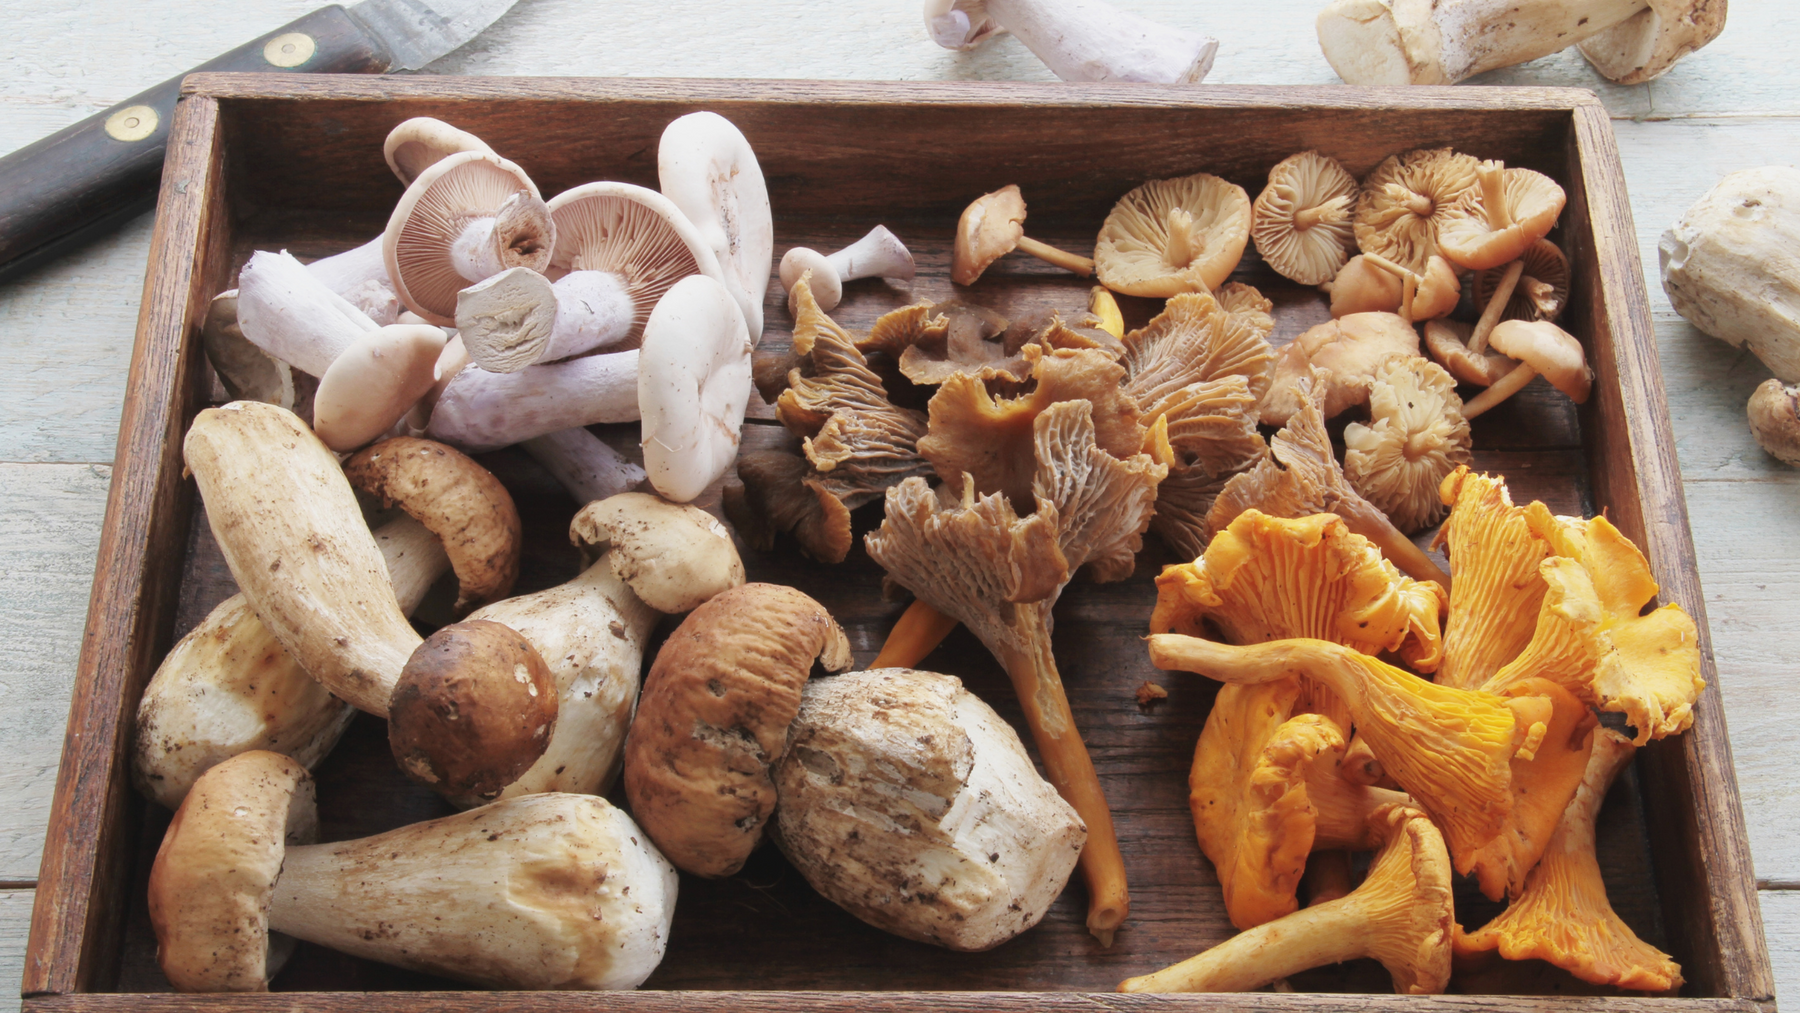 Magnificent Mushrooms: Boost Your Immunity and Wellness